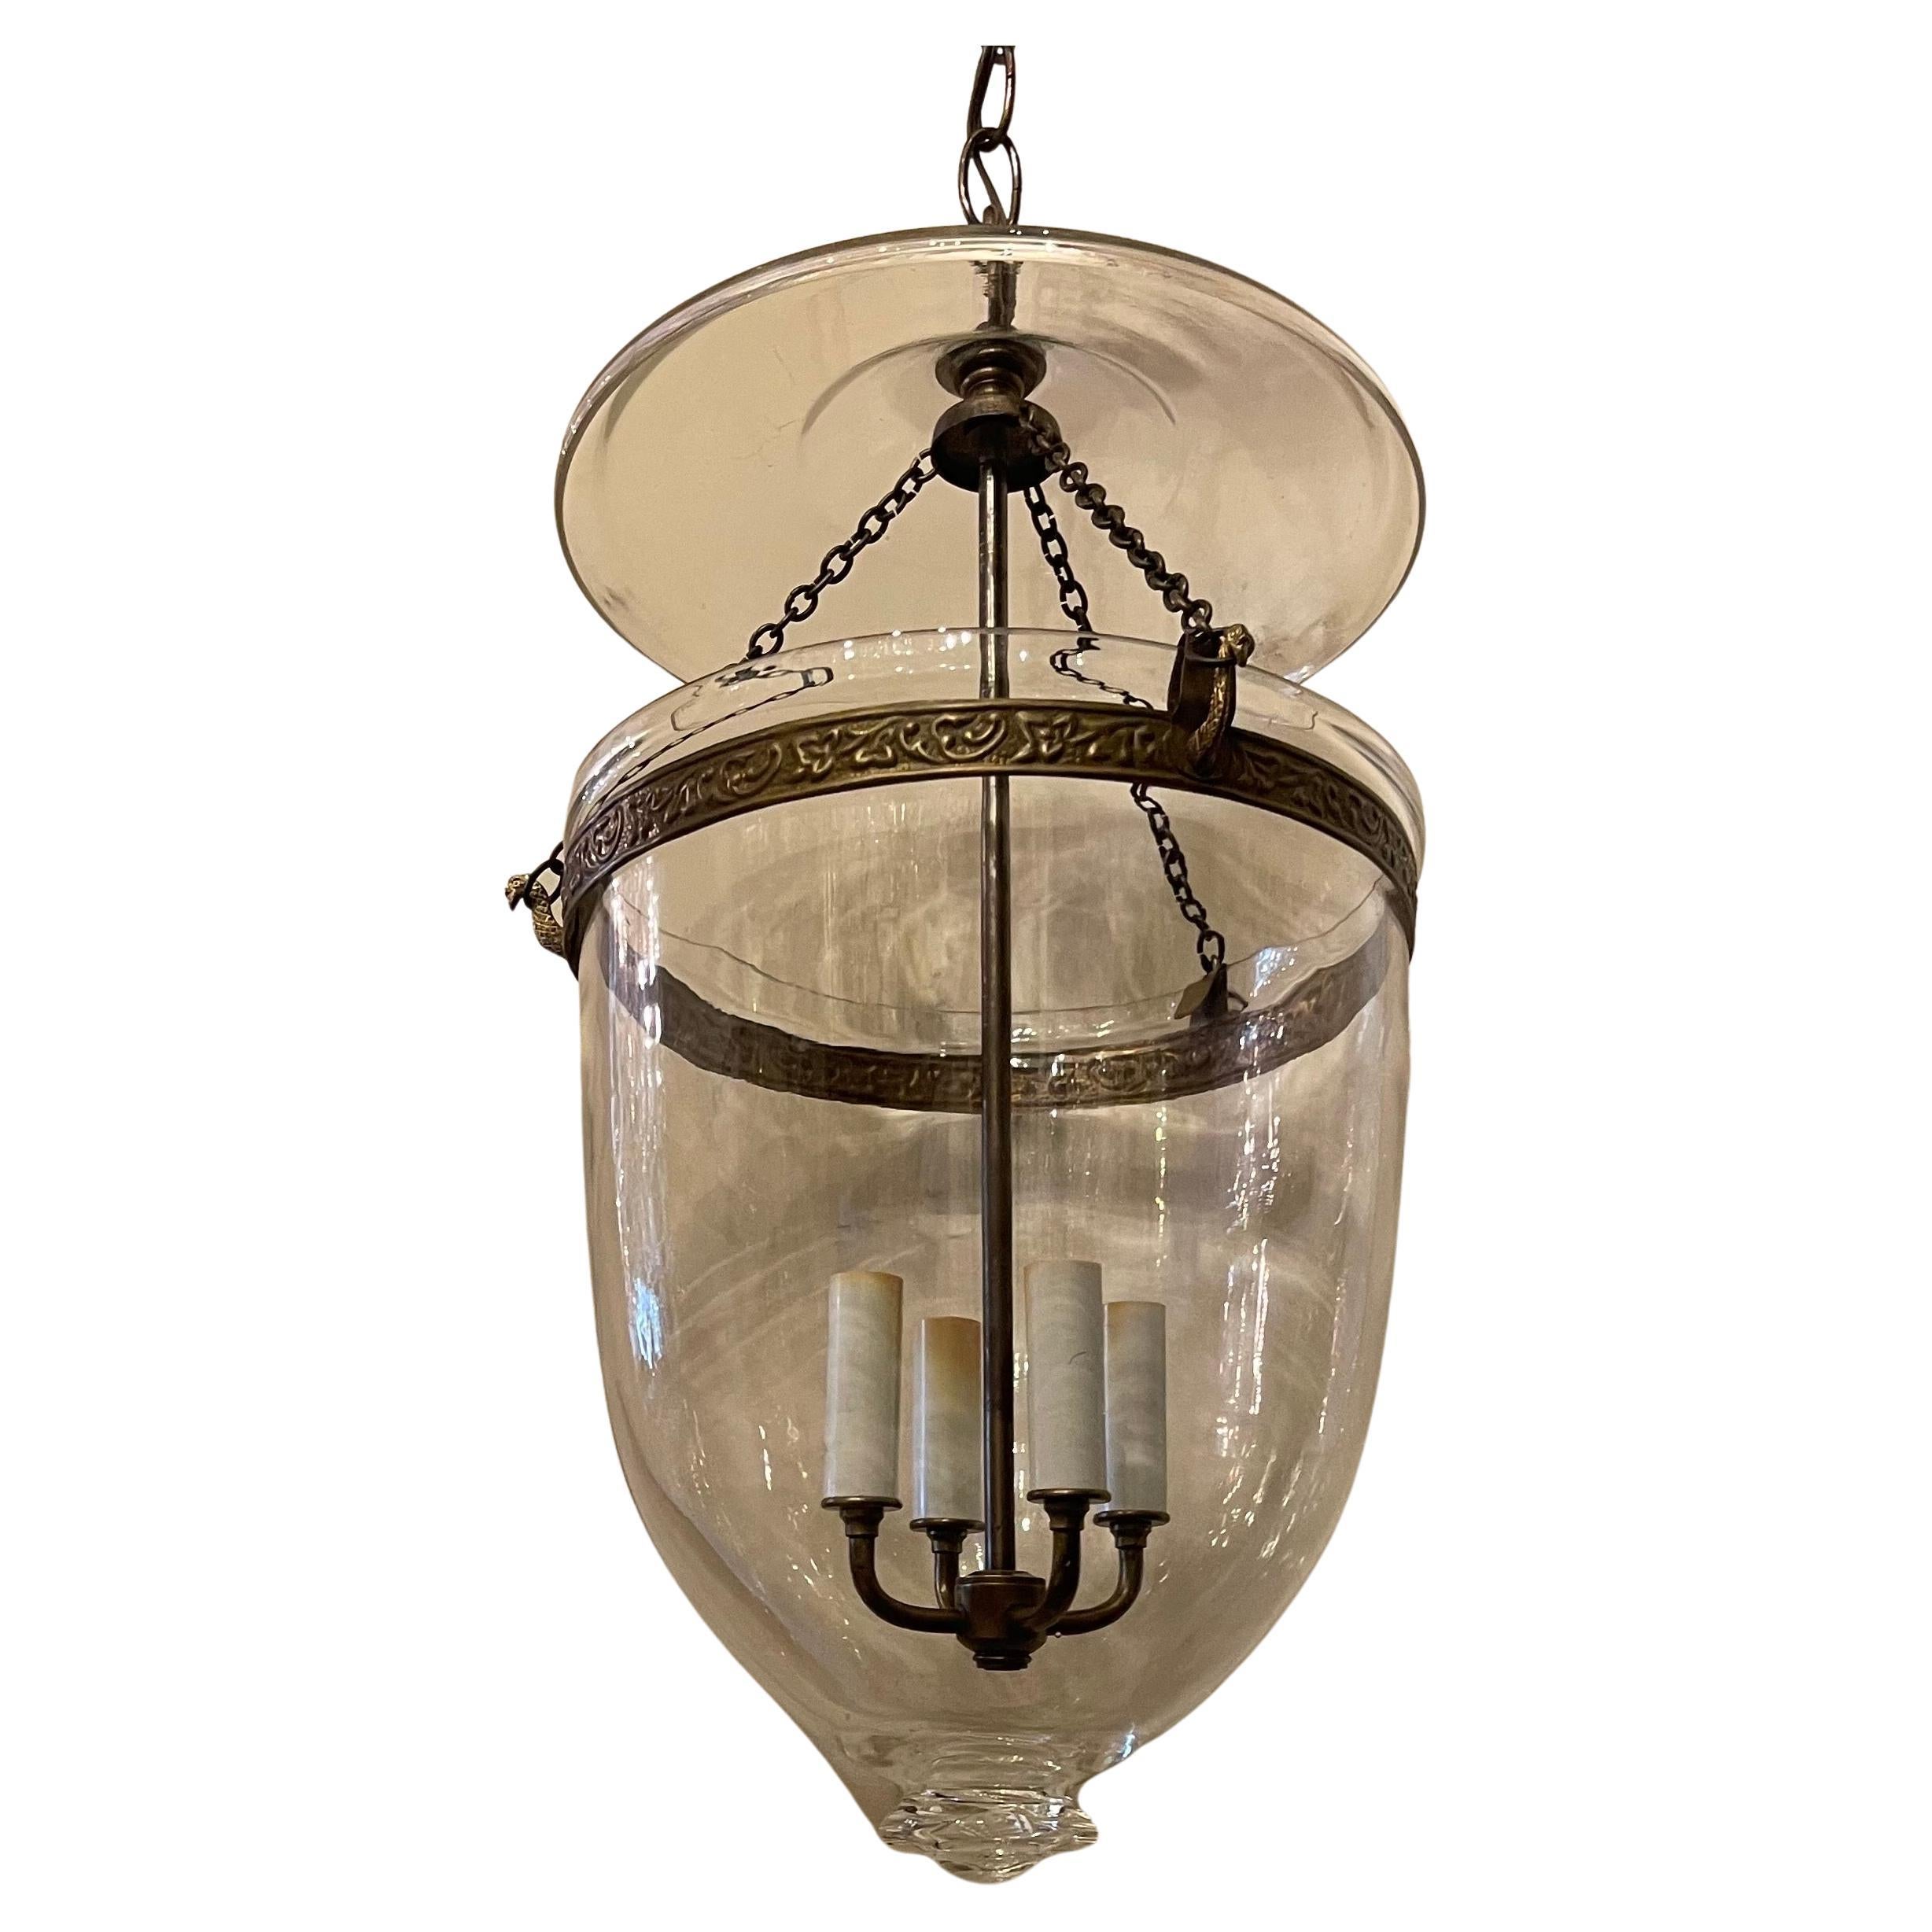 A Fine Pair Of Regency Style Vaughan Designs English Brass / Bronze Blown Glass Bell Jar Lanterns With 4 Candelabra Lights In Each

Pair Is Available
Each Sold Separately